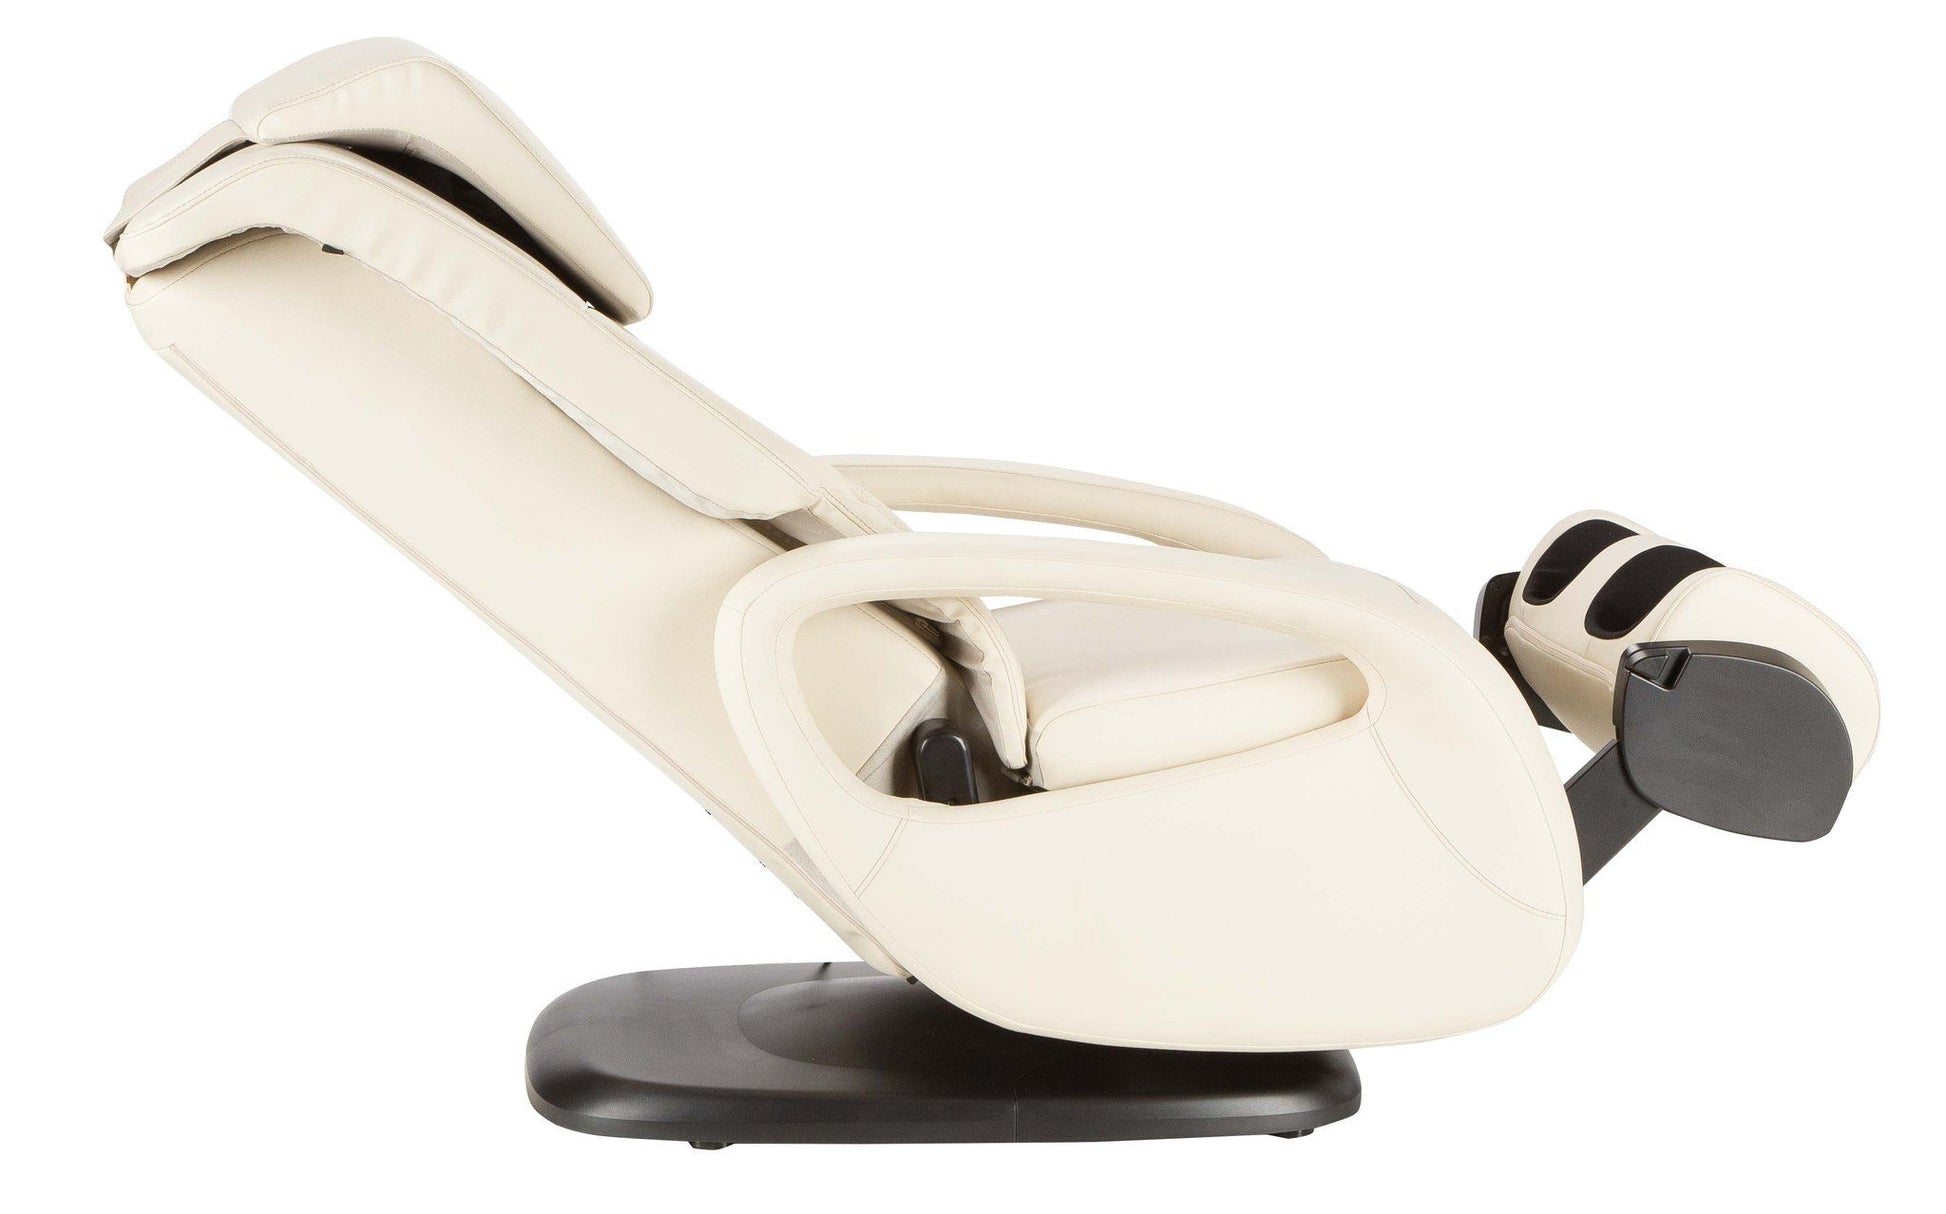 Human Touch Whole Body 8.0 Massage Chair – Wish Rock Relaxation